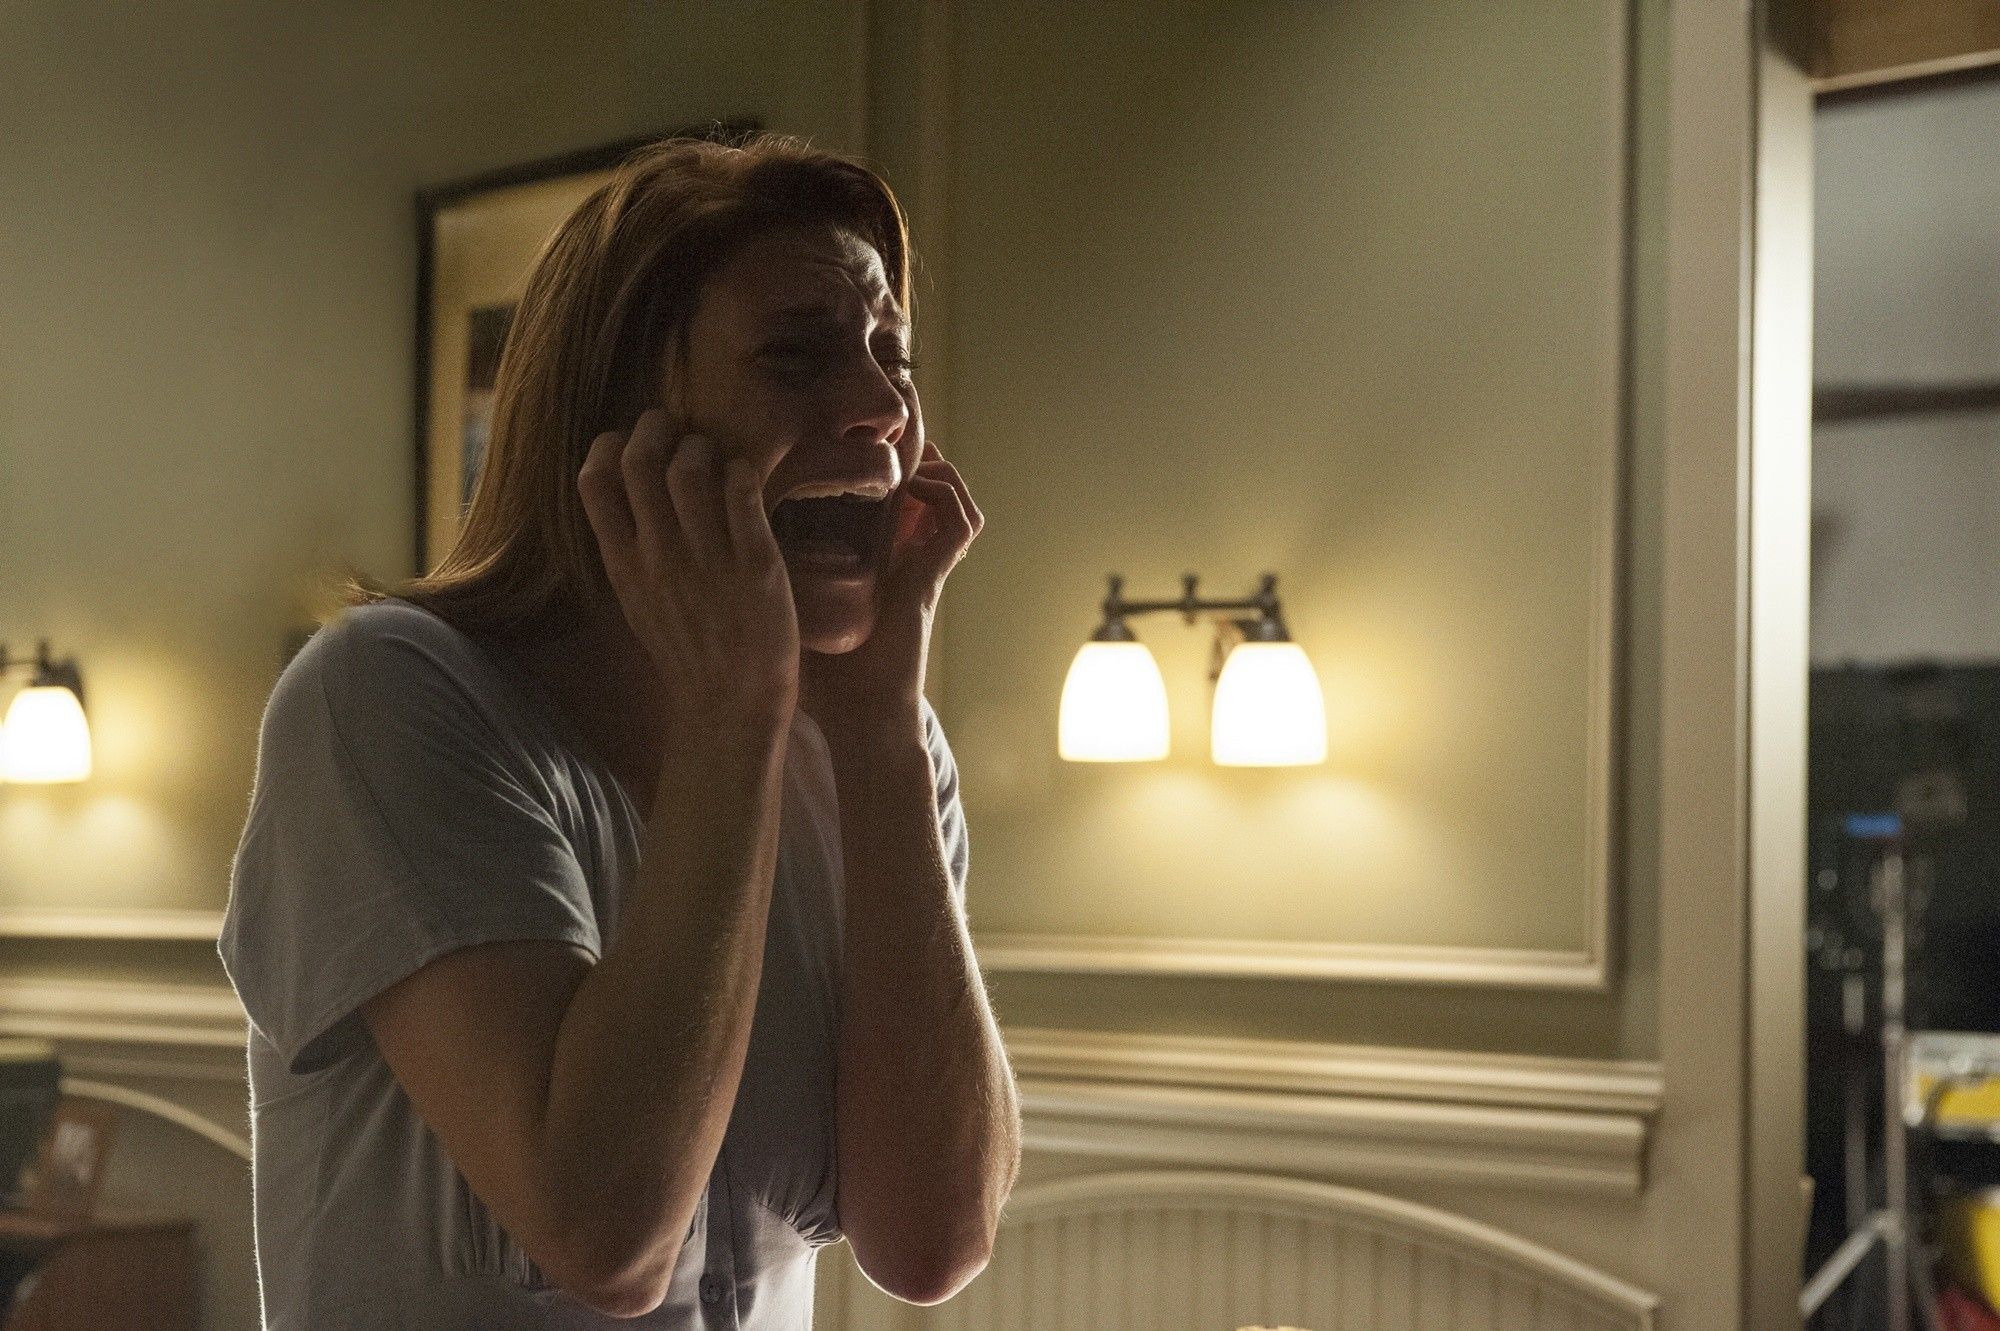 Katee Sackhoff stars as Marie Russell in Relativity Media's Oculus (2014), Photo credit by John Estes.